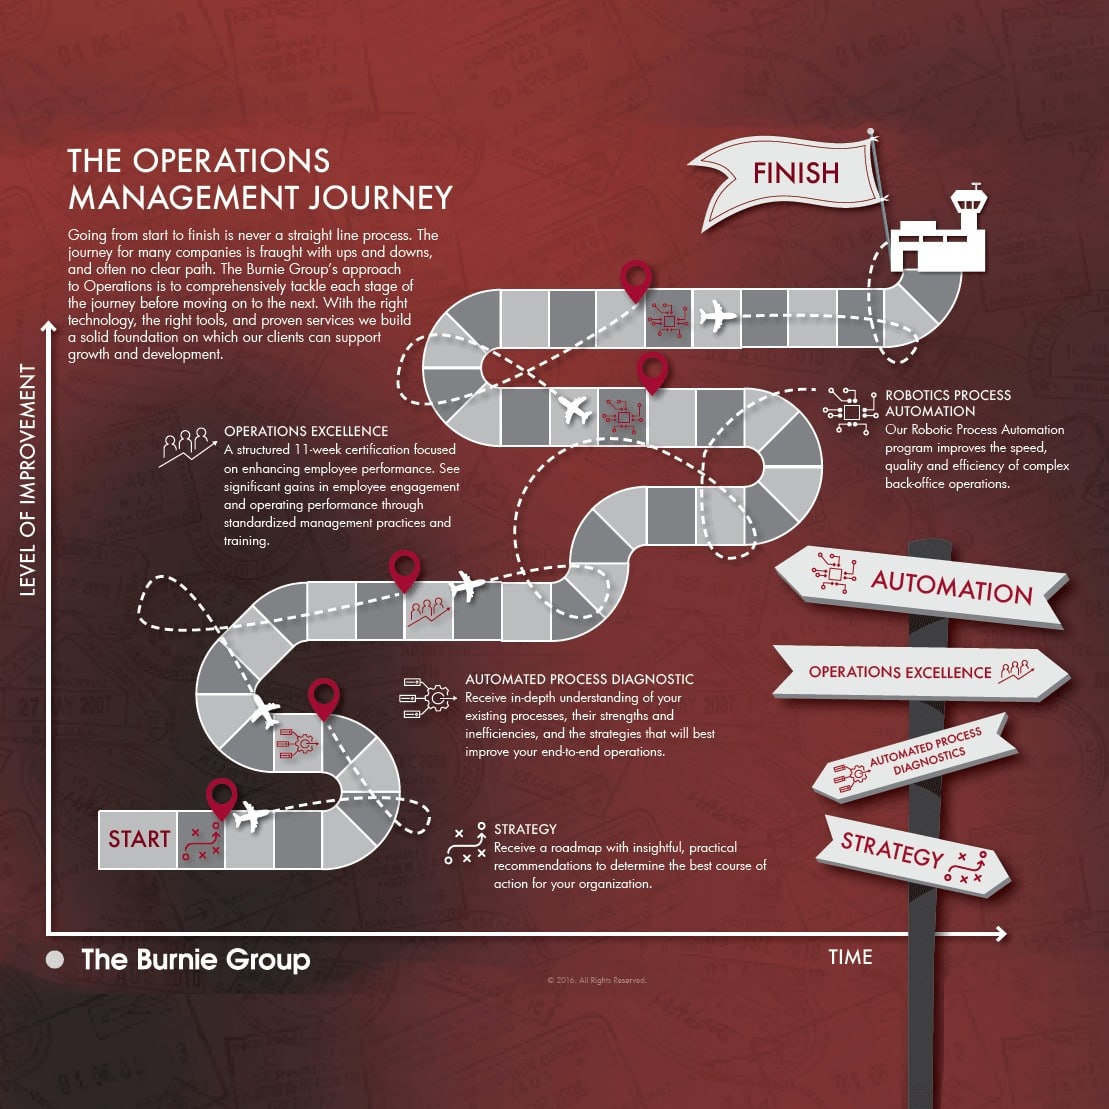 INFOGRAPHIC: The Operations Management Journey